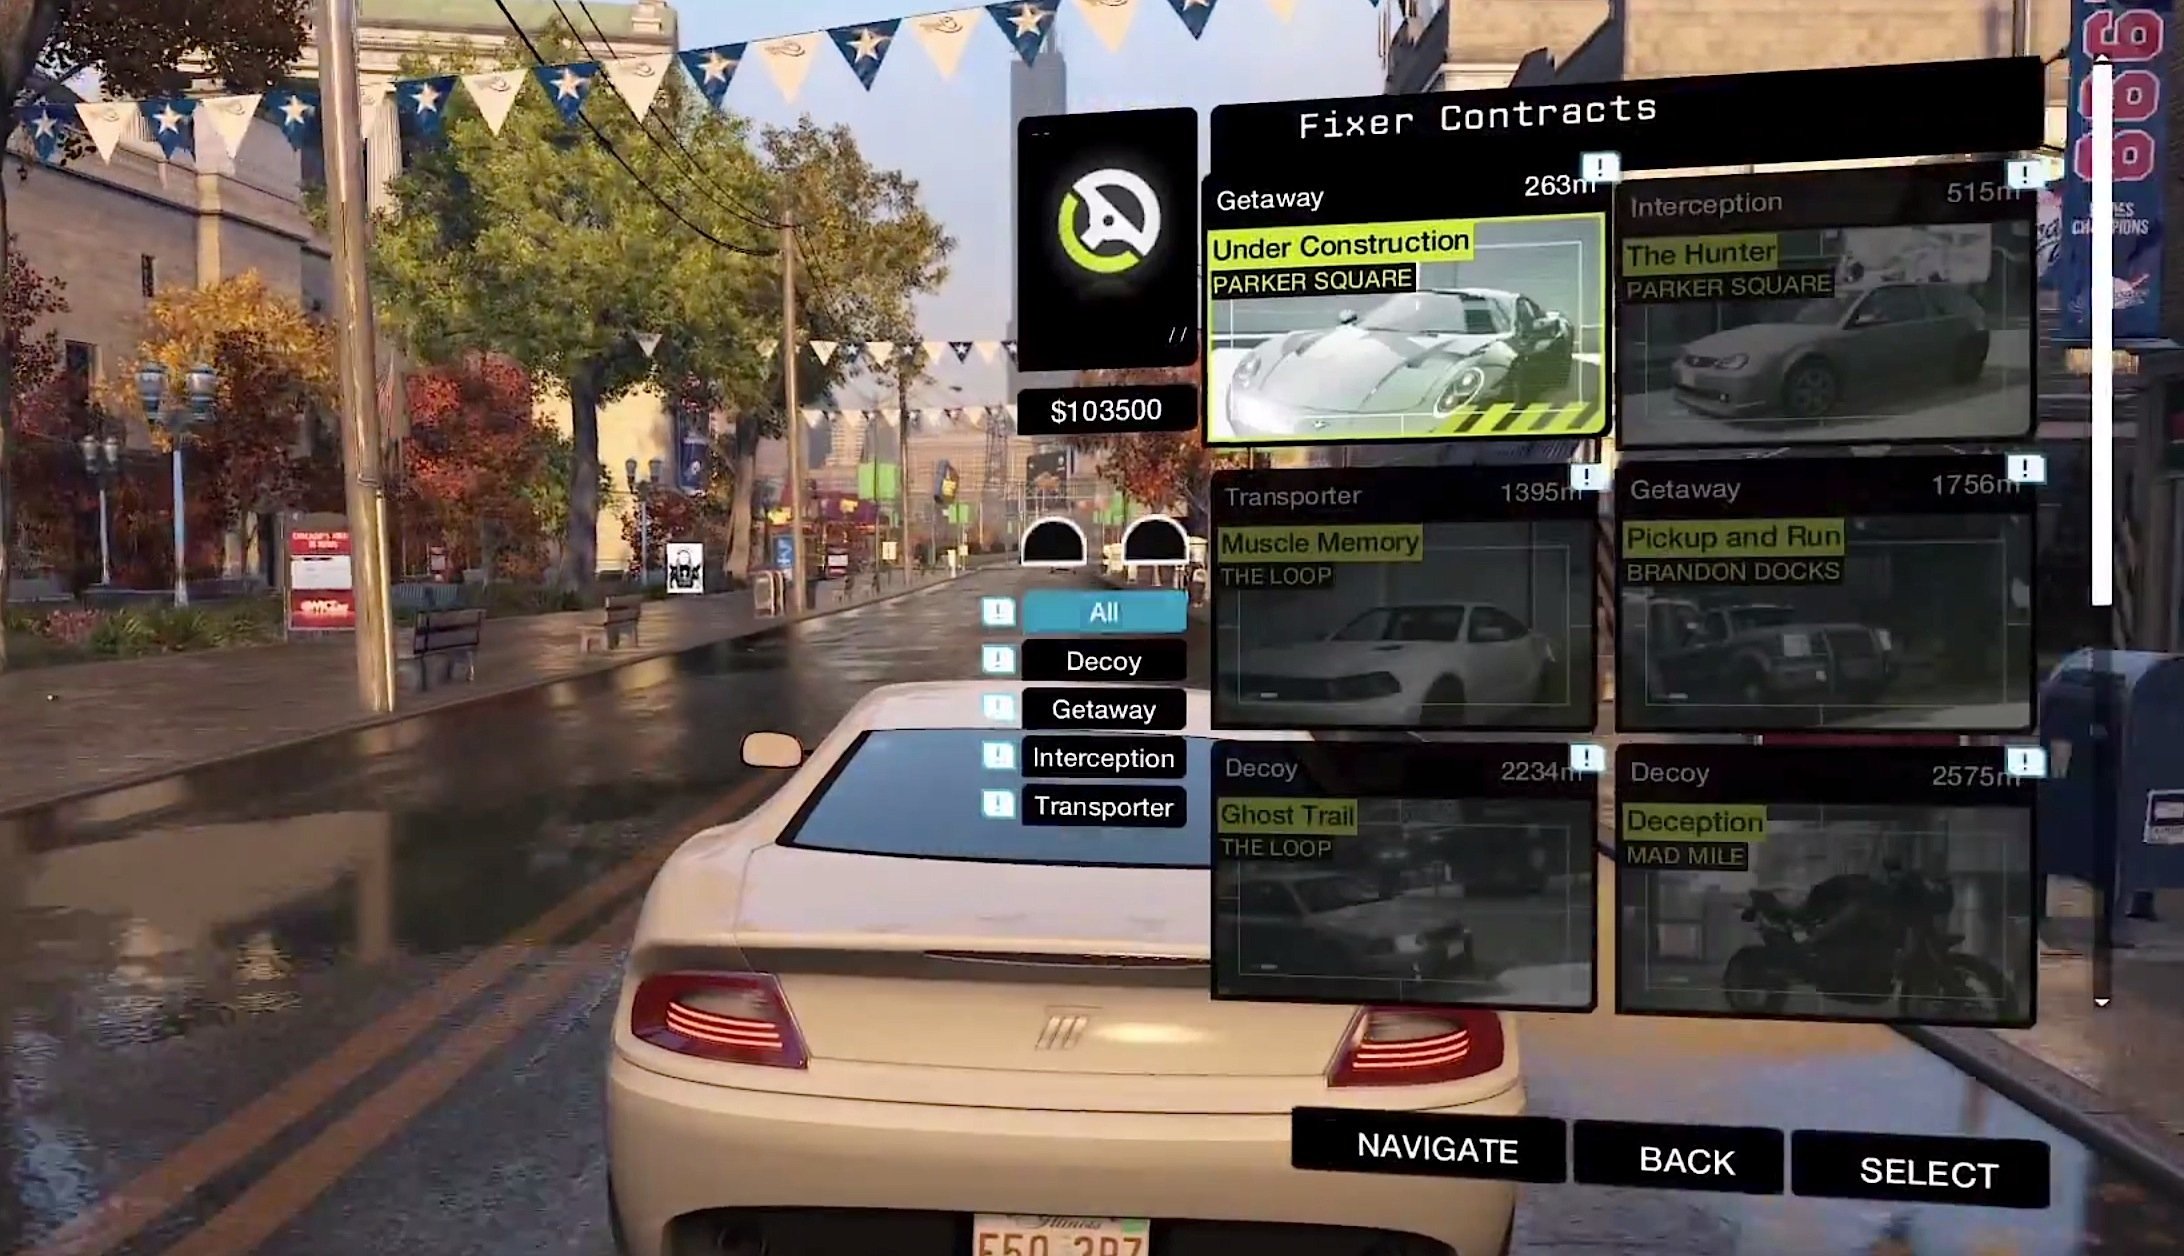 Accept a Watch Dogs driving mission to earn cash.